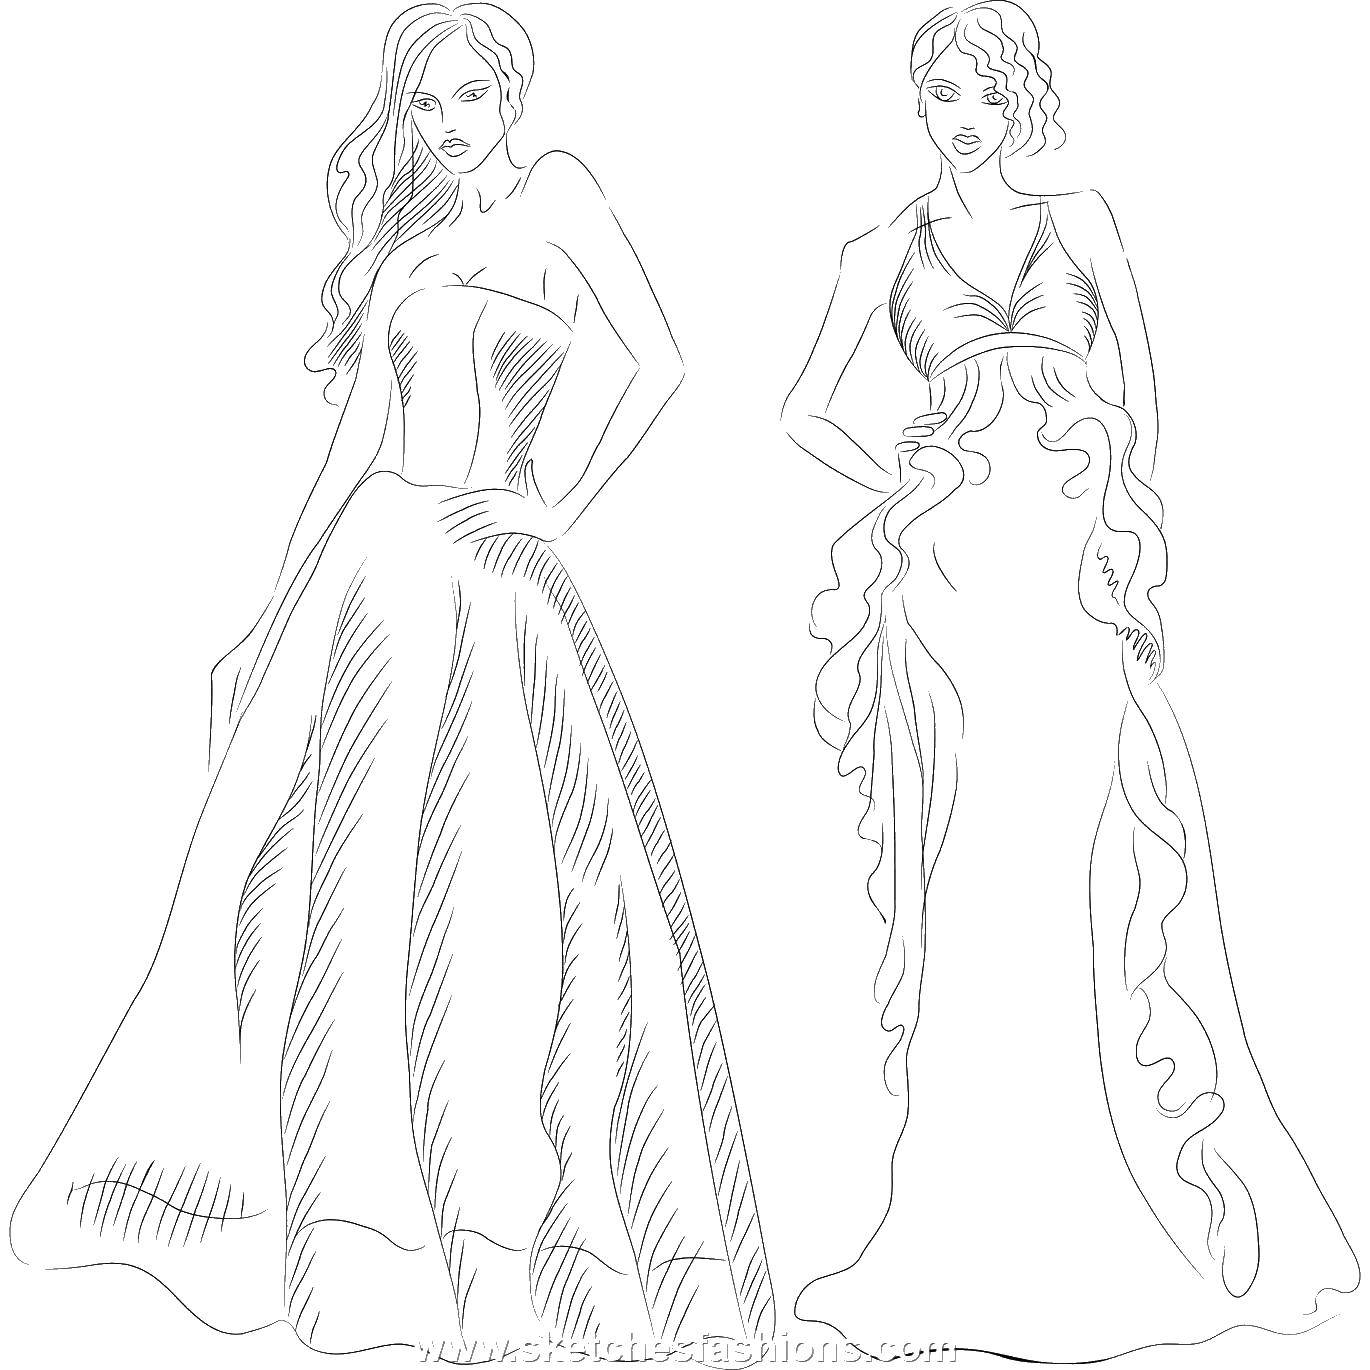 Coloring Dresses. Category Dress. Tags:  Dress, clothes.